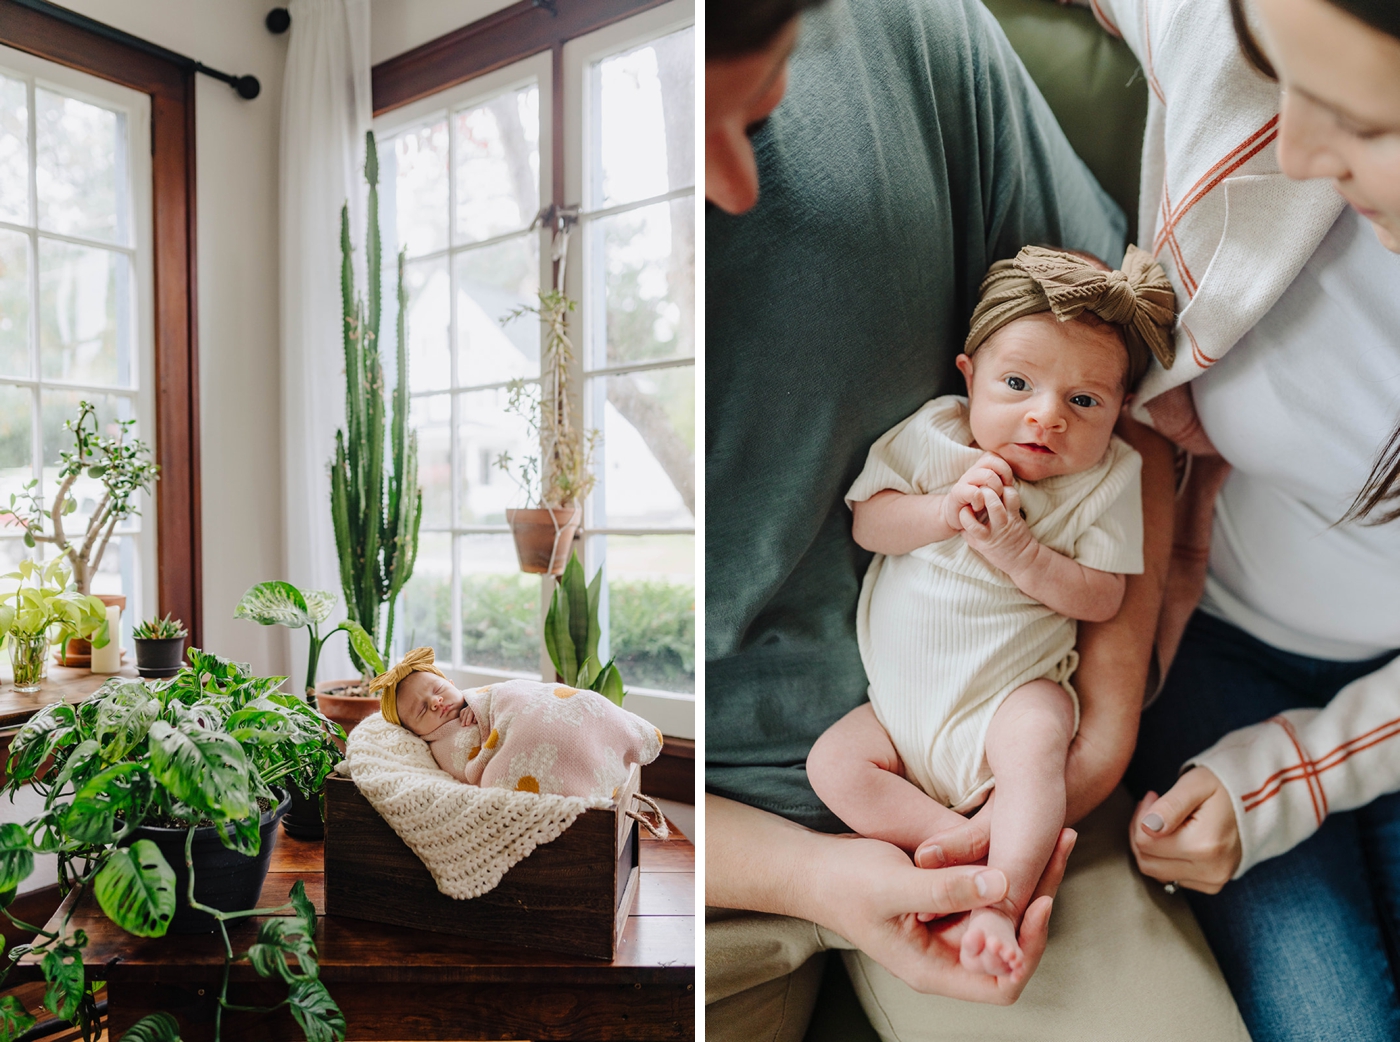 Why we love wedding and family photography